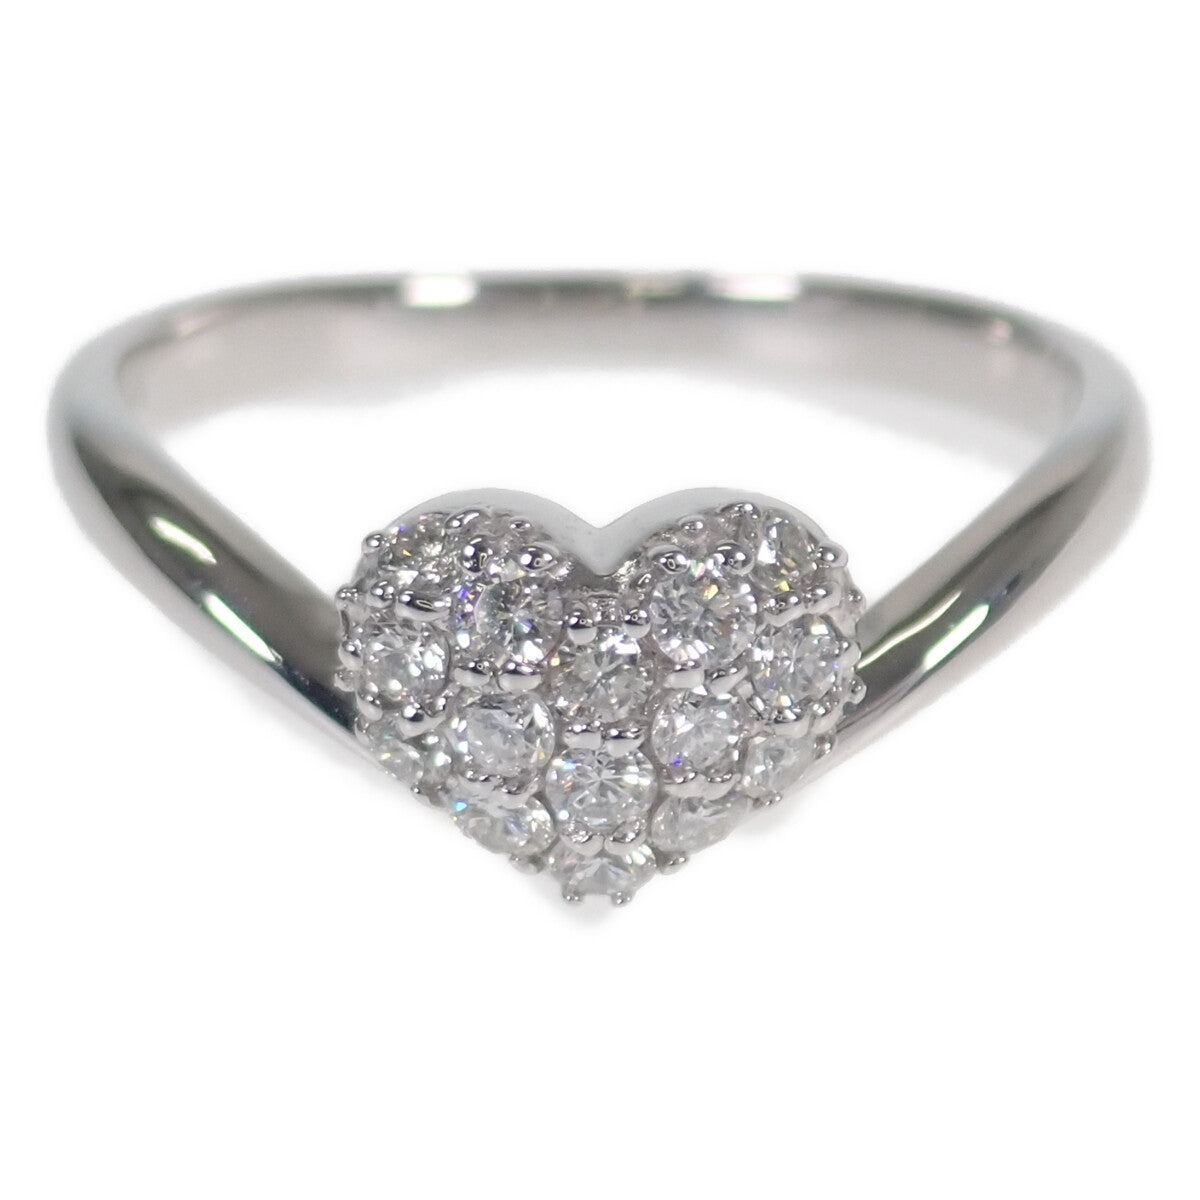 Ladies' K18 White Gold Heart Pave Design Diamond Ring (0.28ct) - Size 11, Preowned